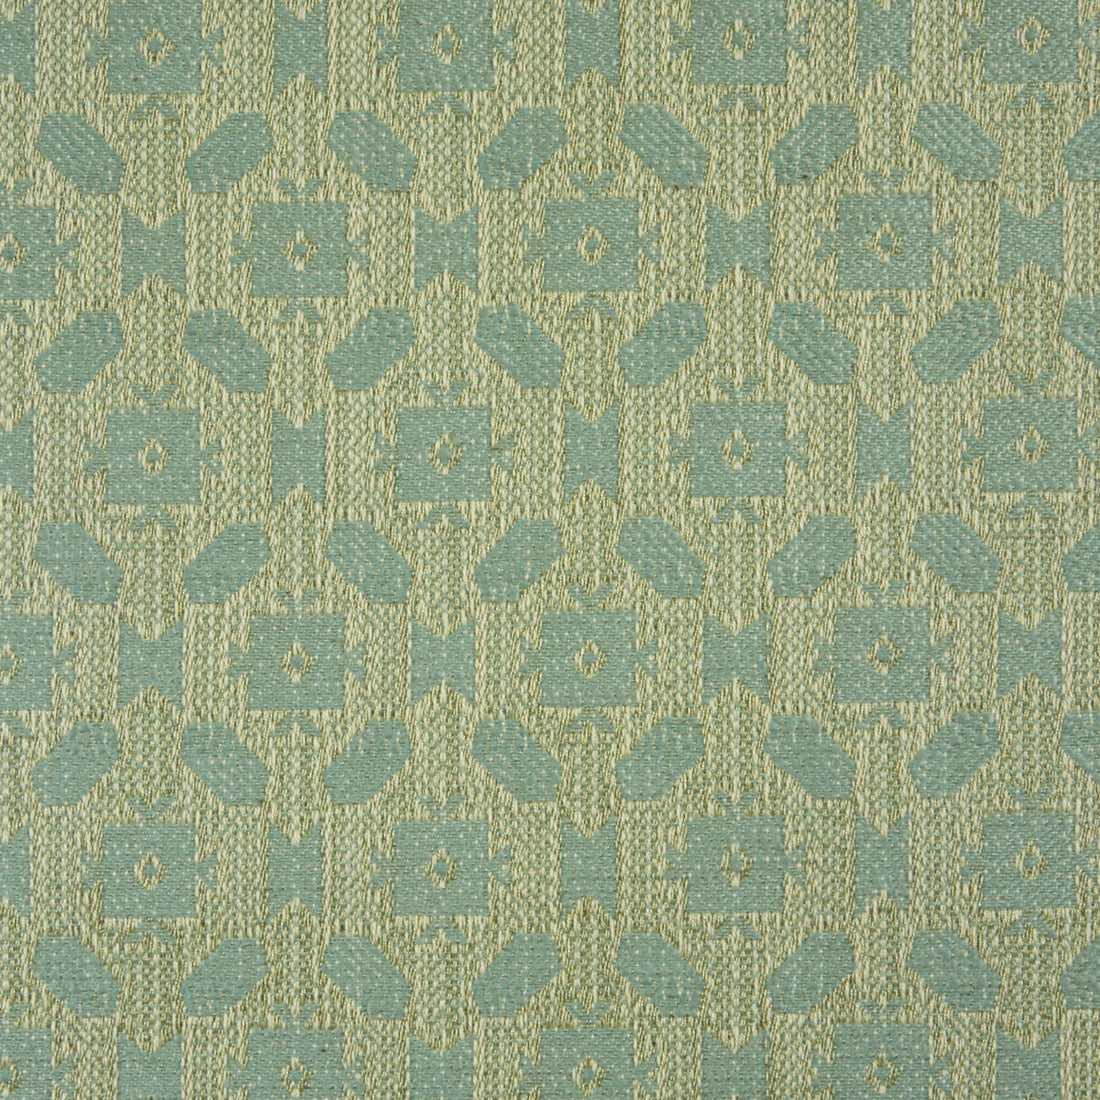 Lowell fabric in aqua color - pattern BFC-3635.513.0 - by Lee Jofa in the Blithfield collection